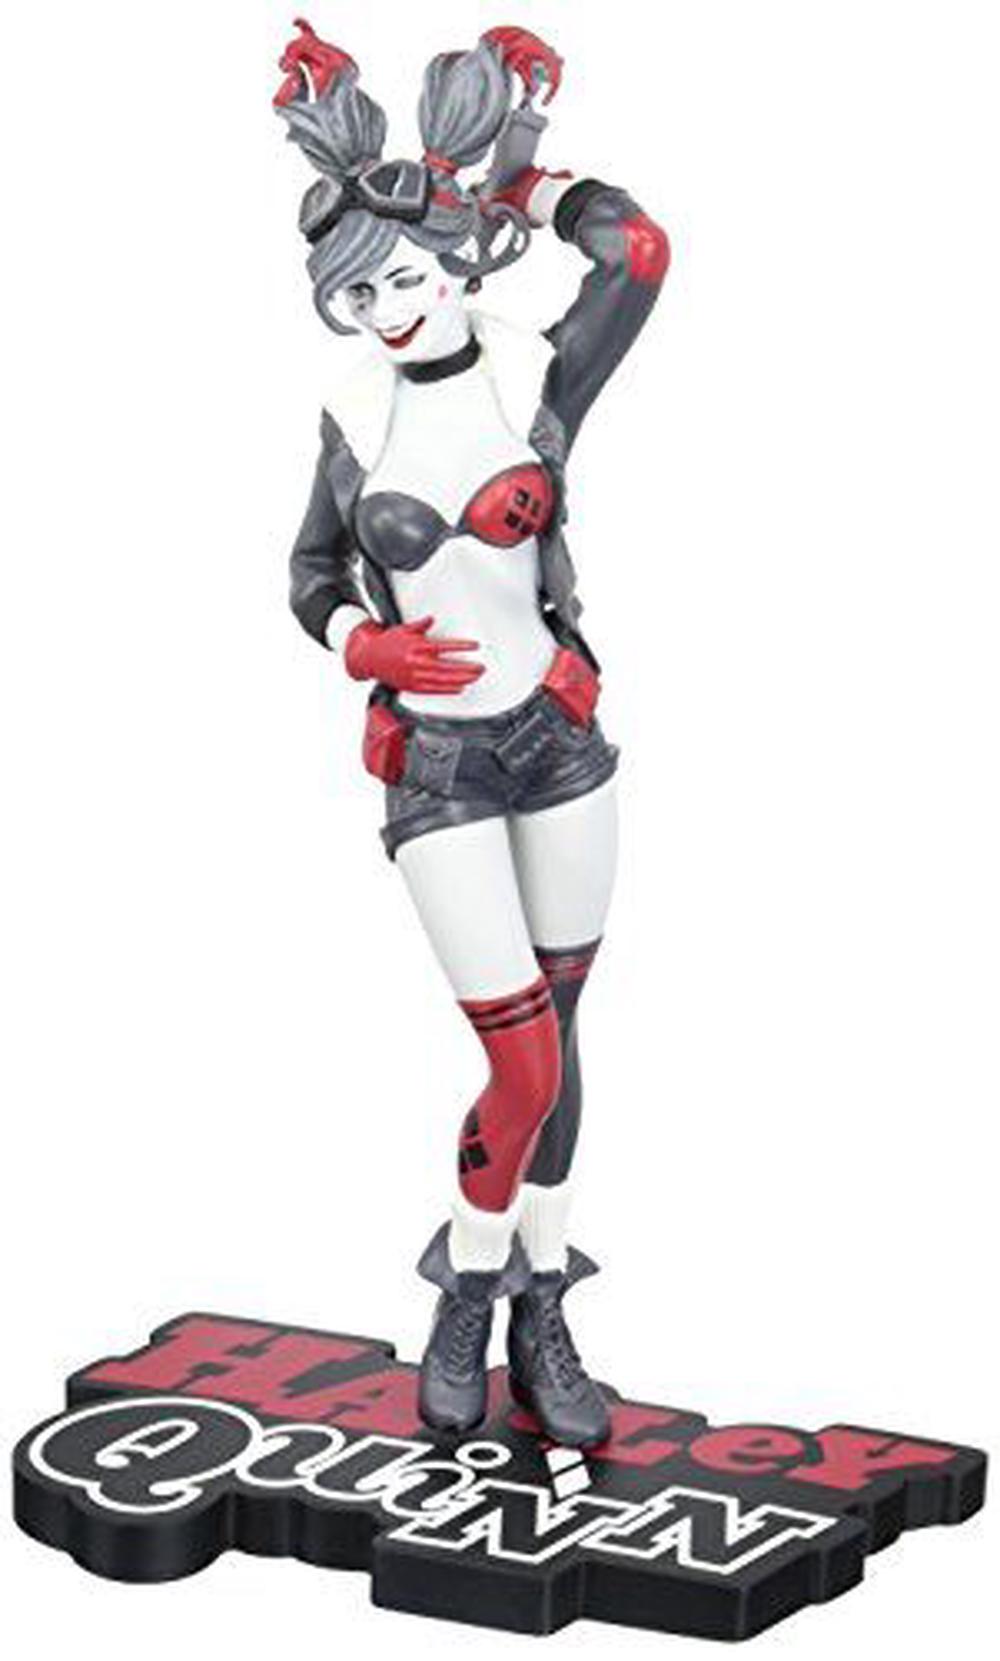 HARLEY QUINN DC BOMBSHELL RED WHITE & BLACK STATUE FIGURE BY ANT LUCIA NEW